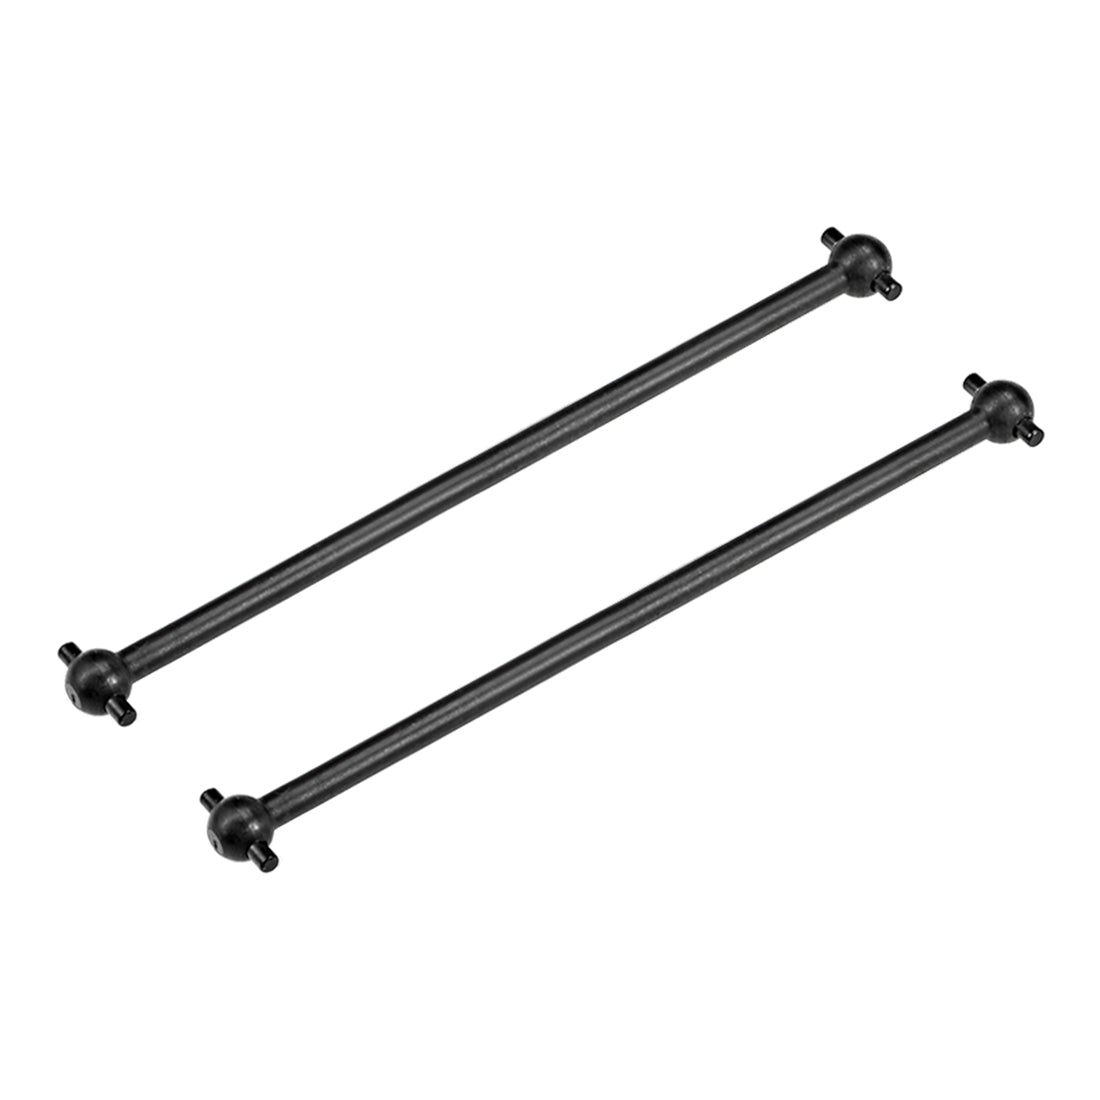 uxcell Uxcell 89.5mm Drive Shaft for 1/10 RC Car Truck Black 2pcs